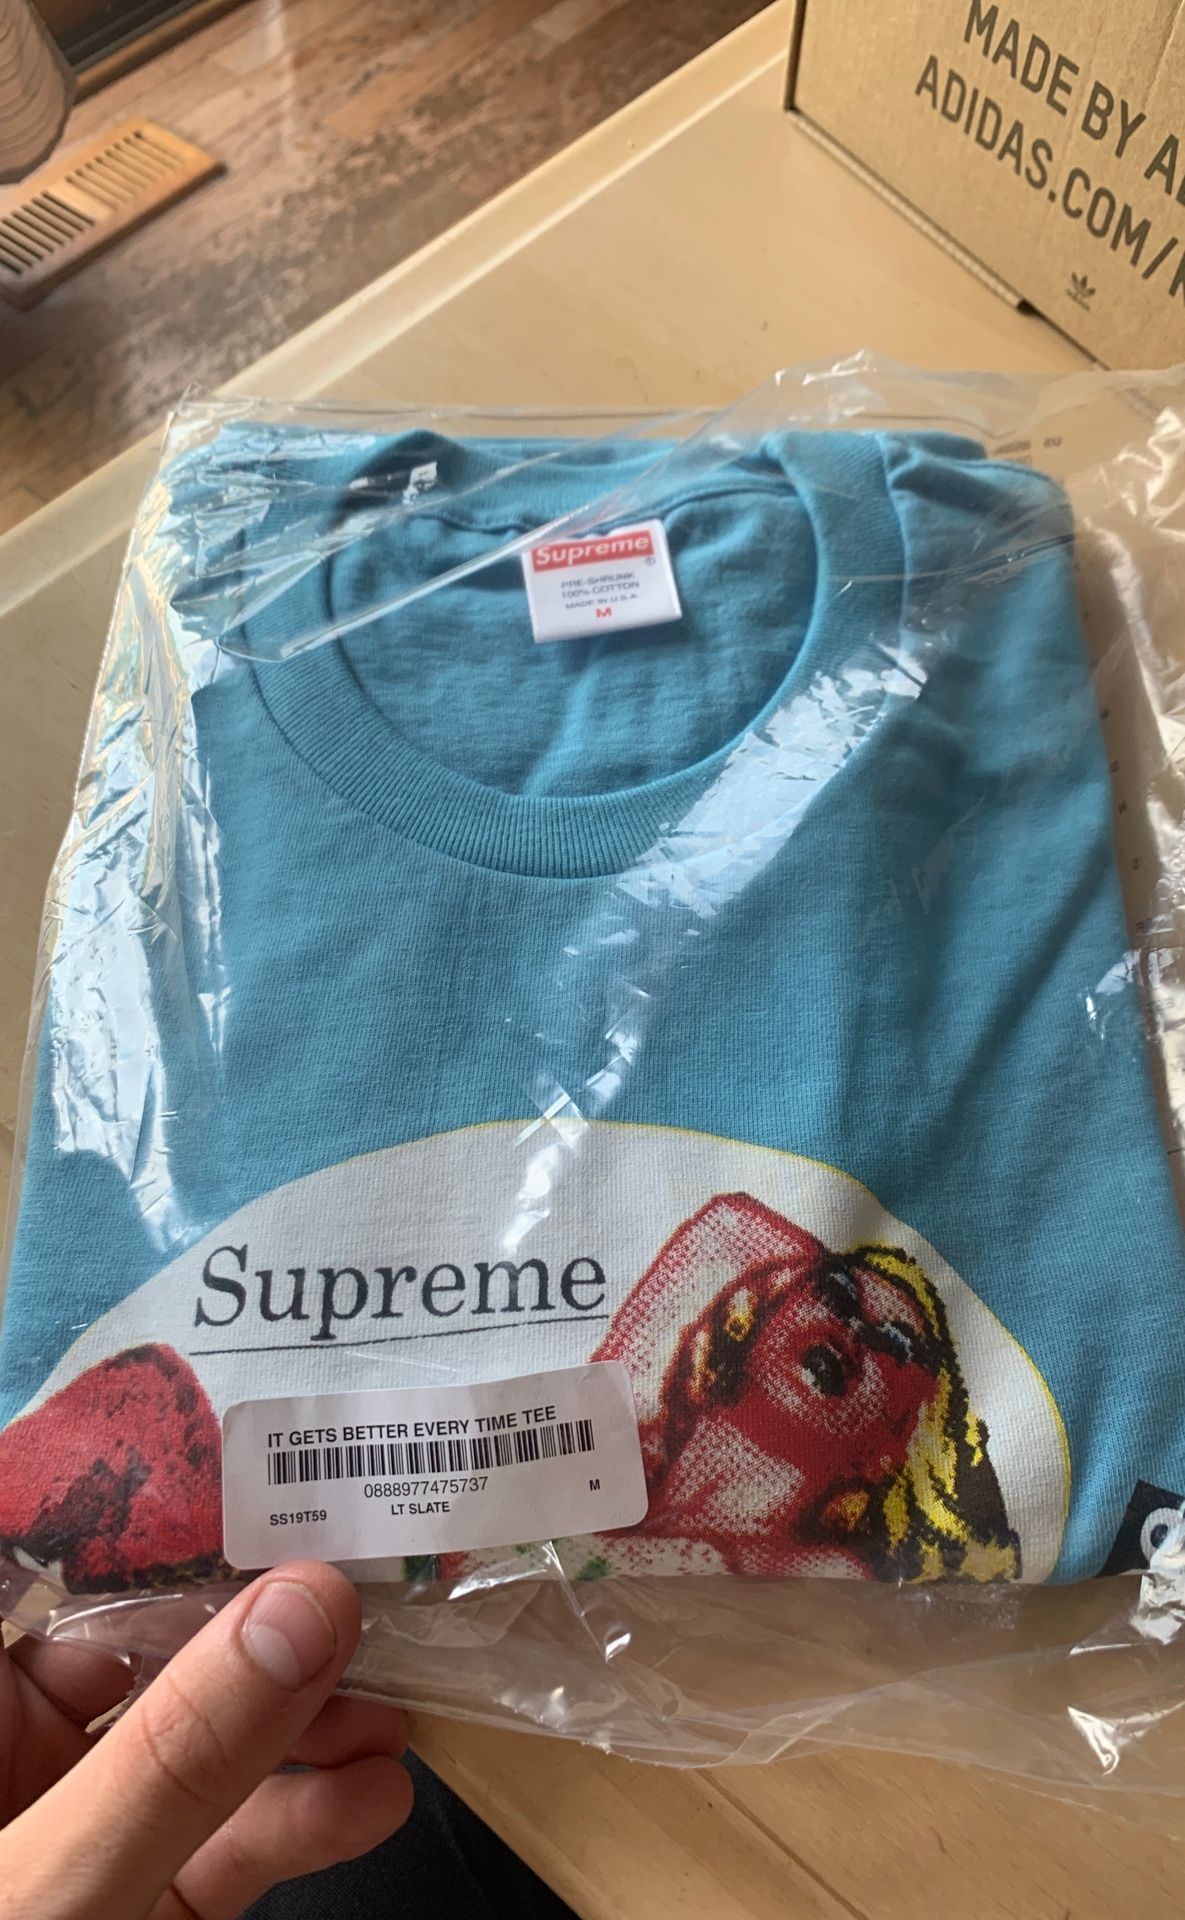 Supreme every time it gets better